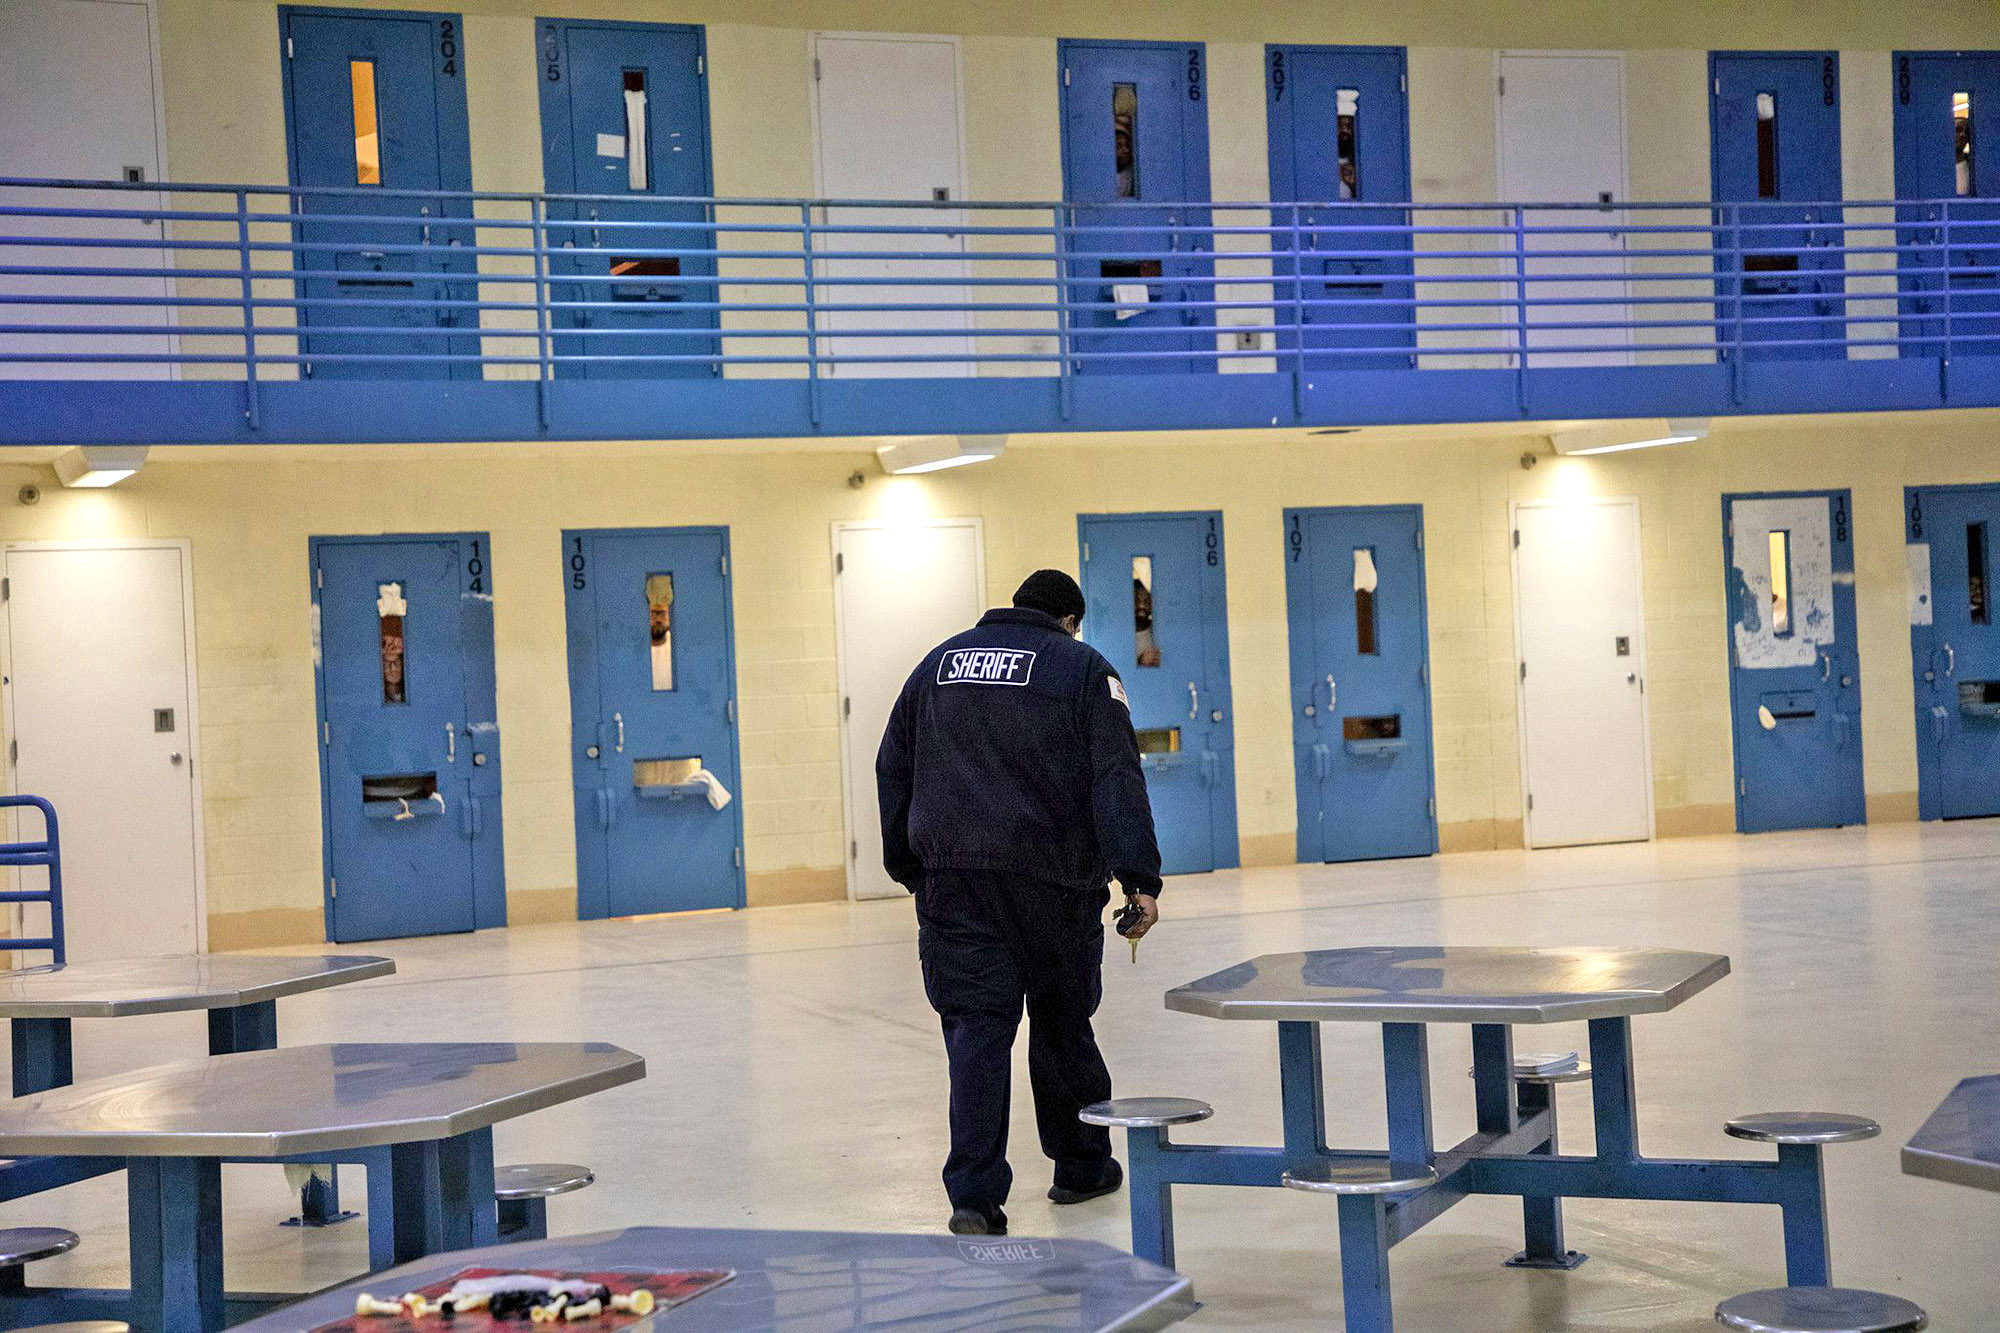 PHOTO: A Sheriff walks towards detainee cells at Cook County jail in Chicago, May 20, 2020.  